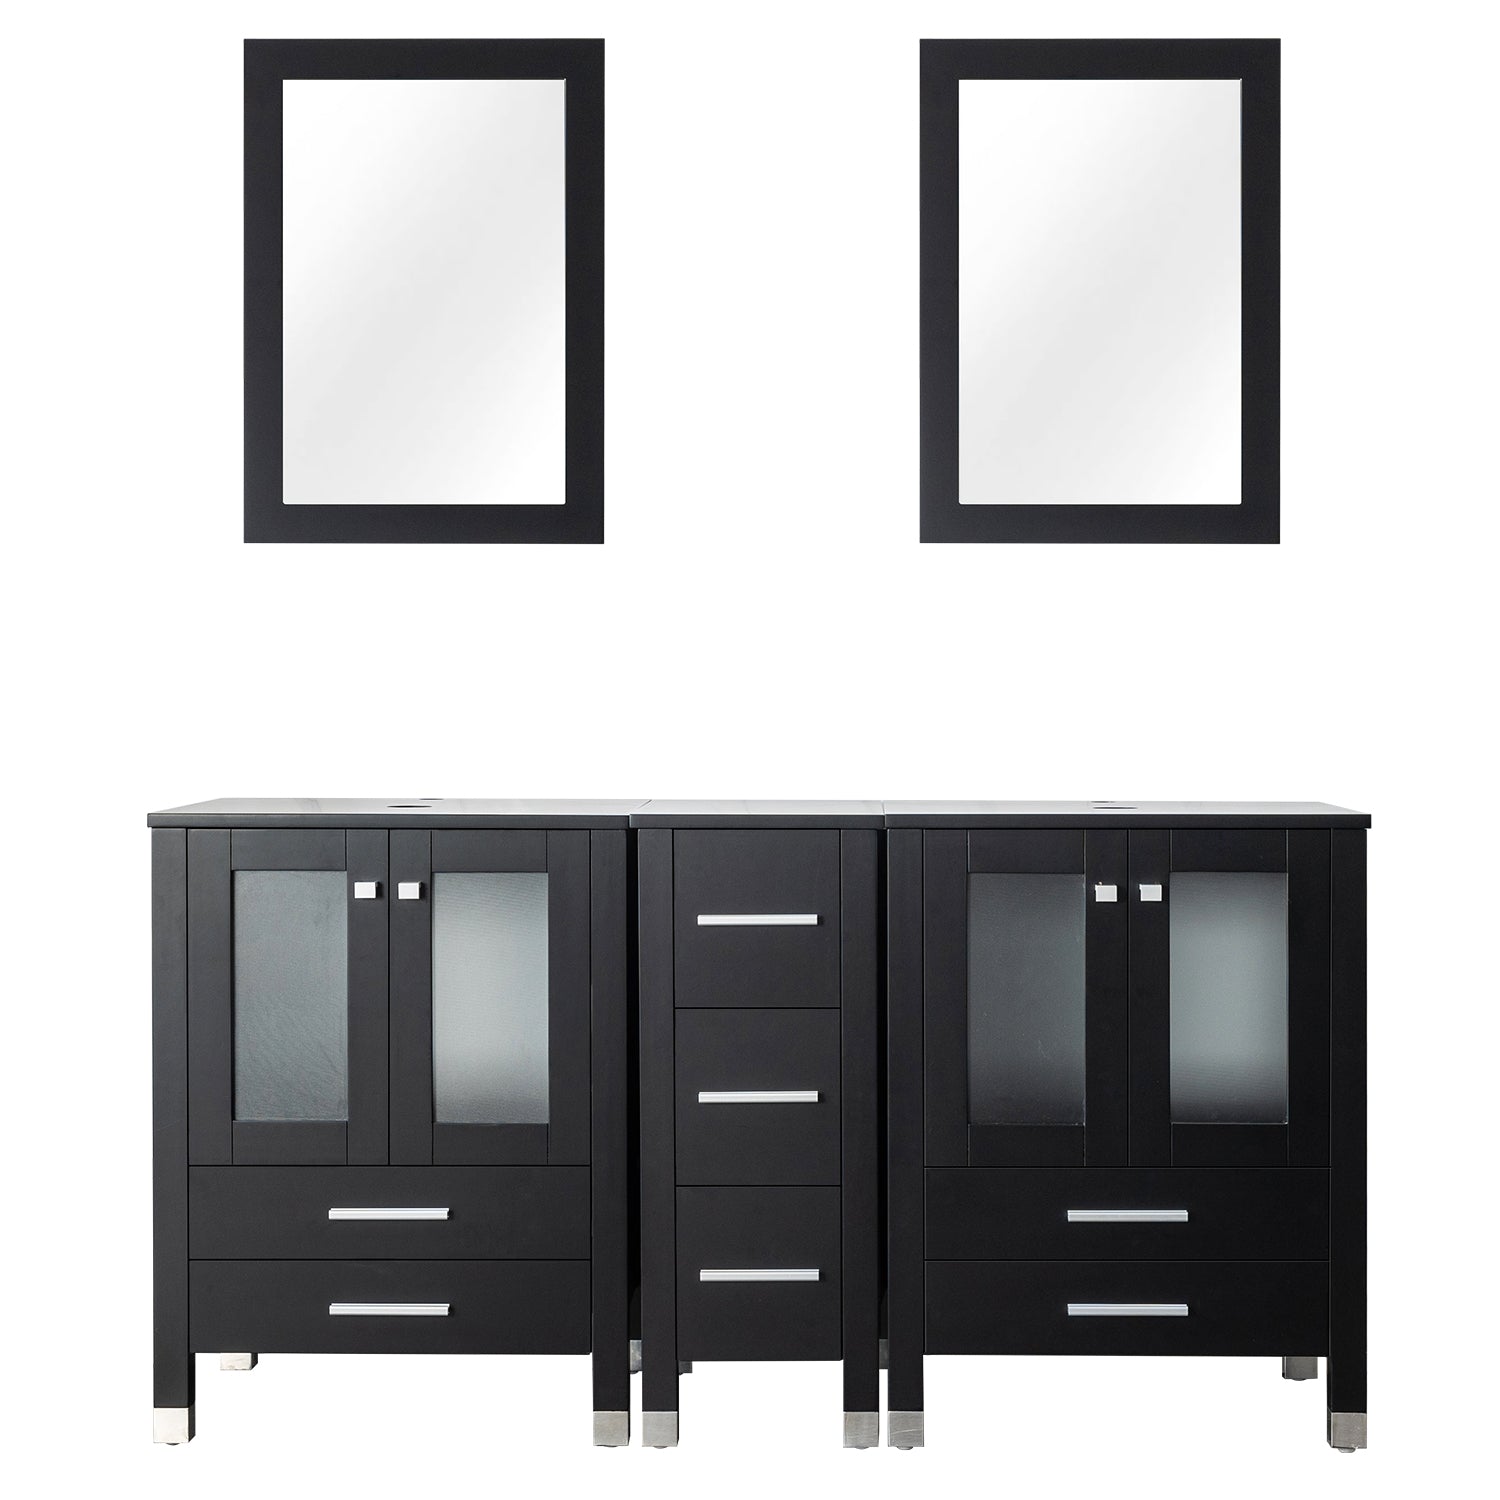 Eclife 60" Double Bathroom Vanity Sink Combos, Solid Wood Construction and Painted Frame - Black